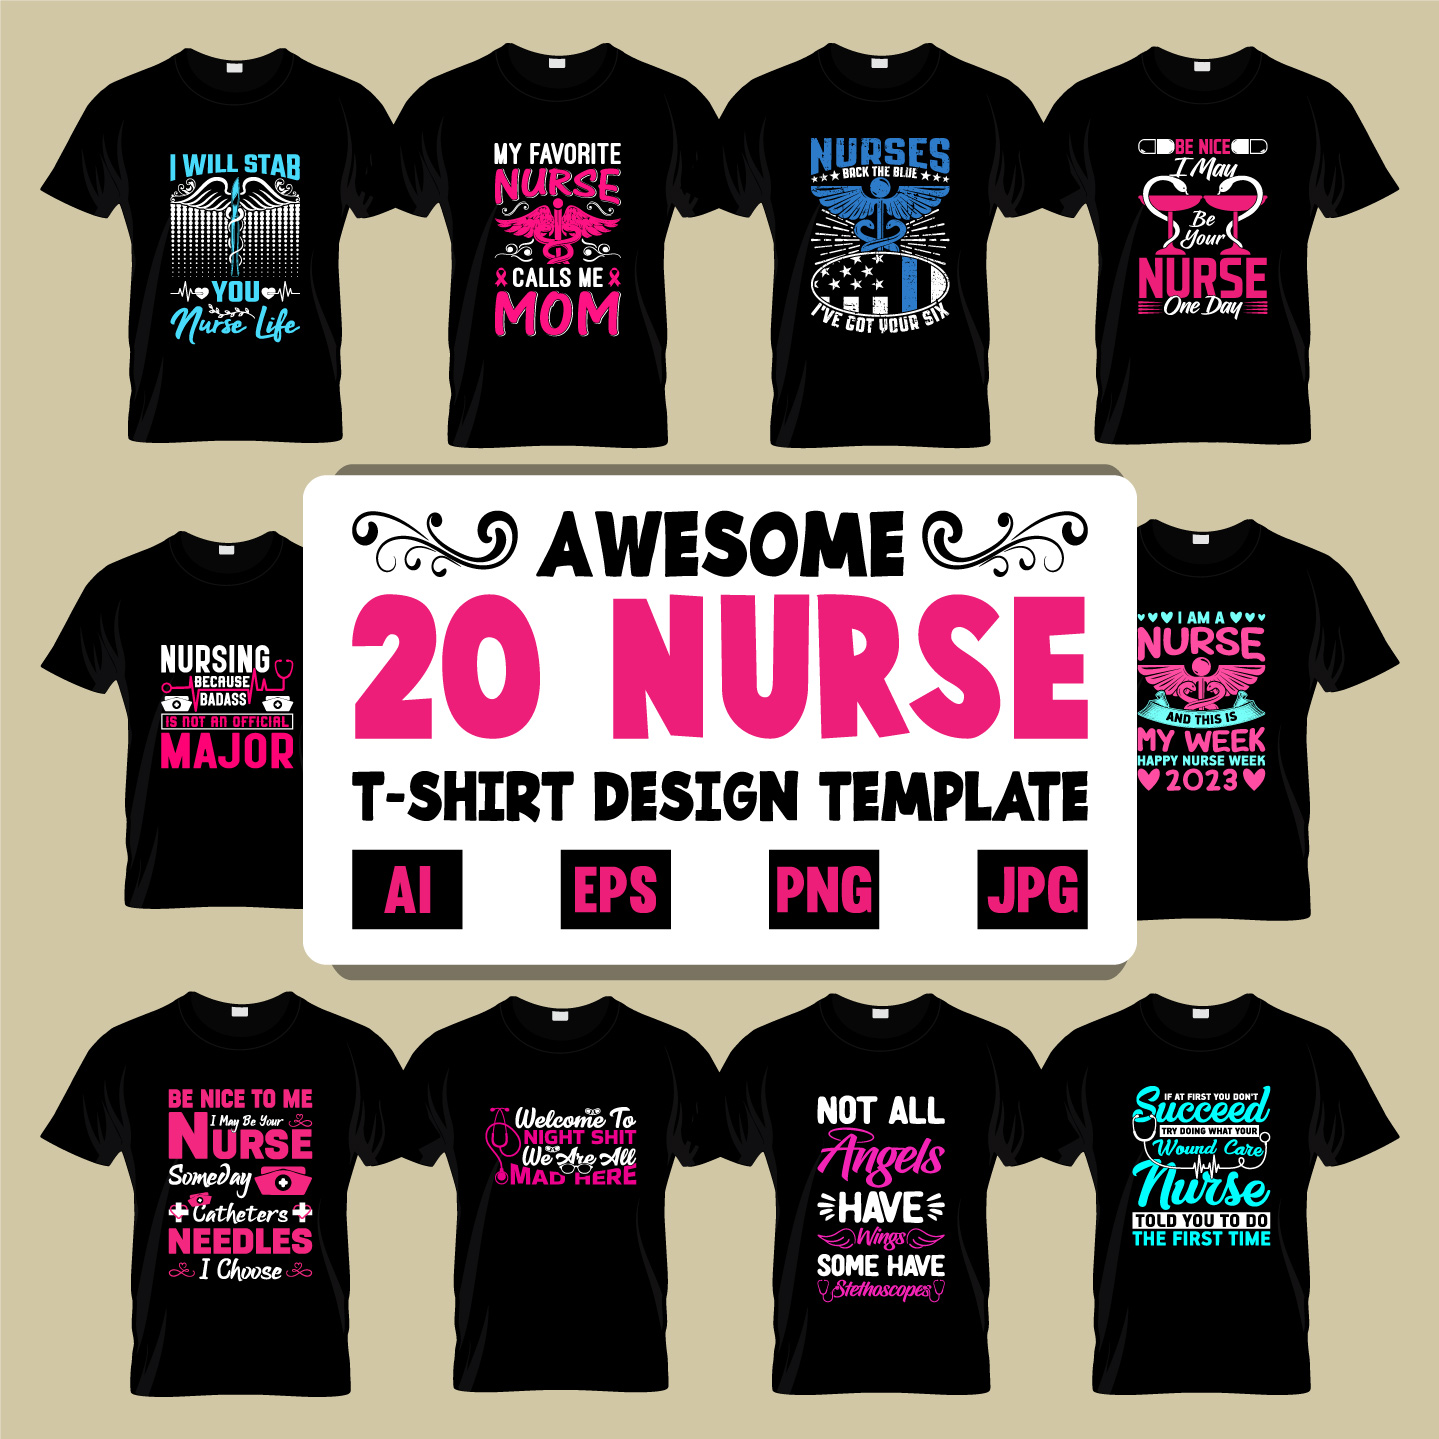 This is high quality nurse t-shirt design template with printable file cover image.